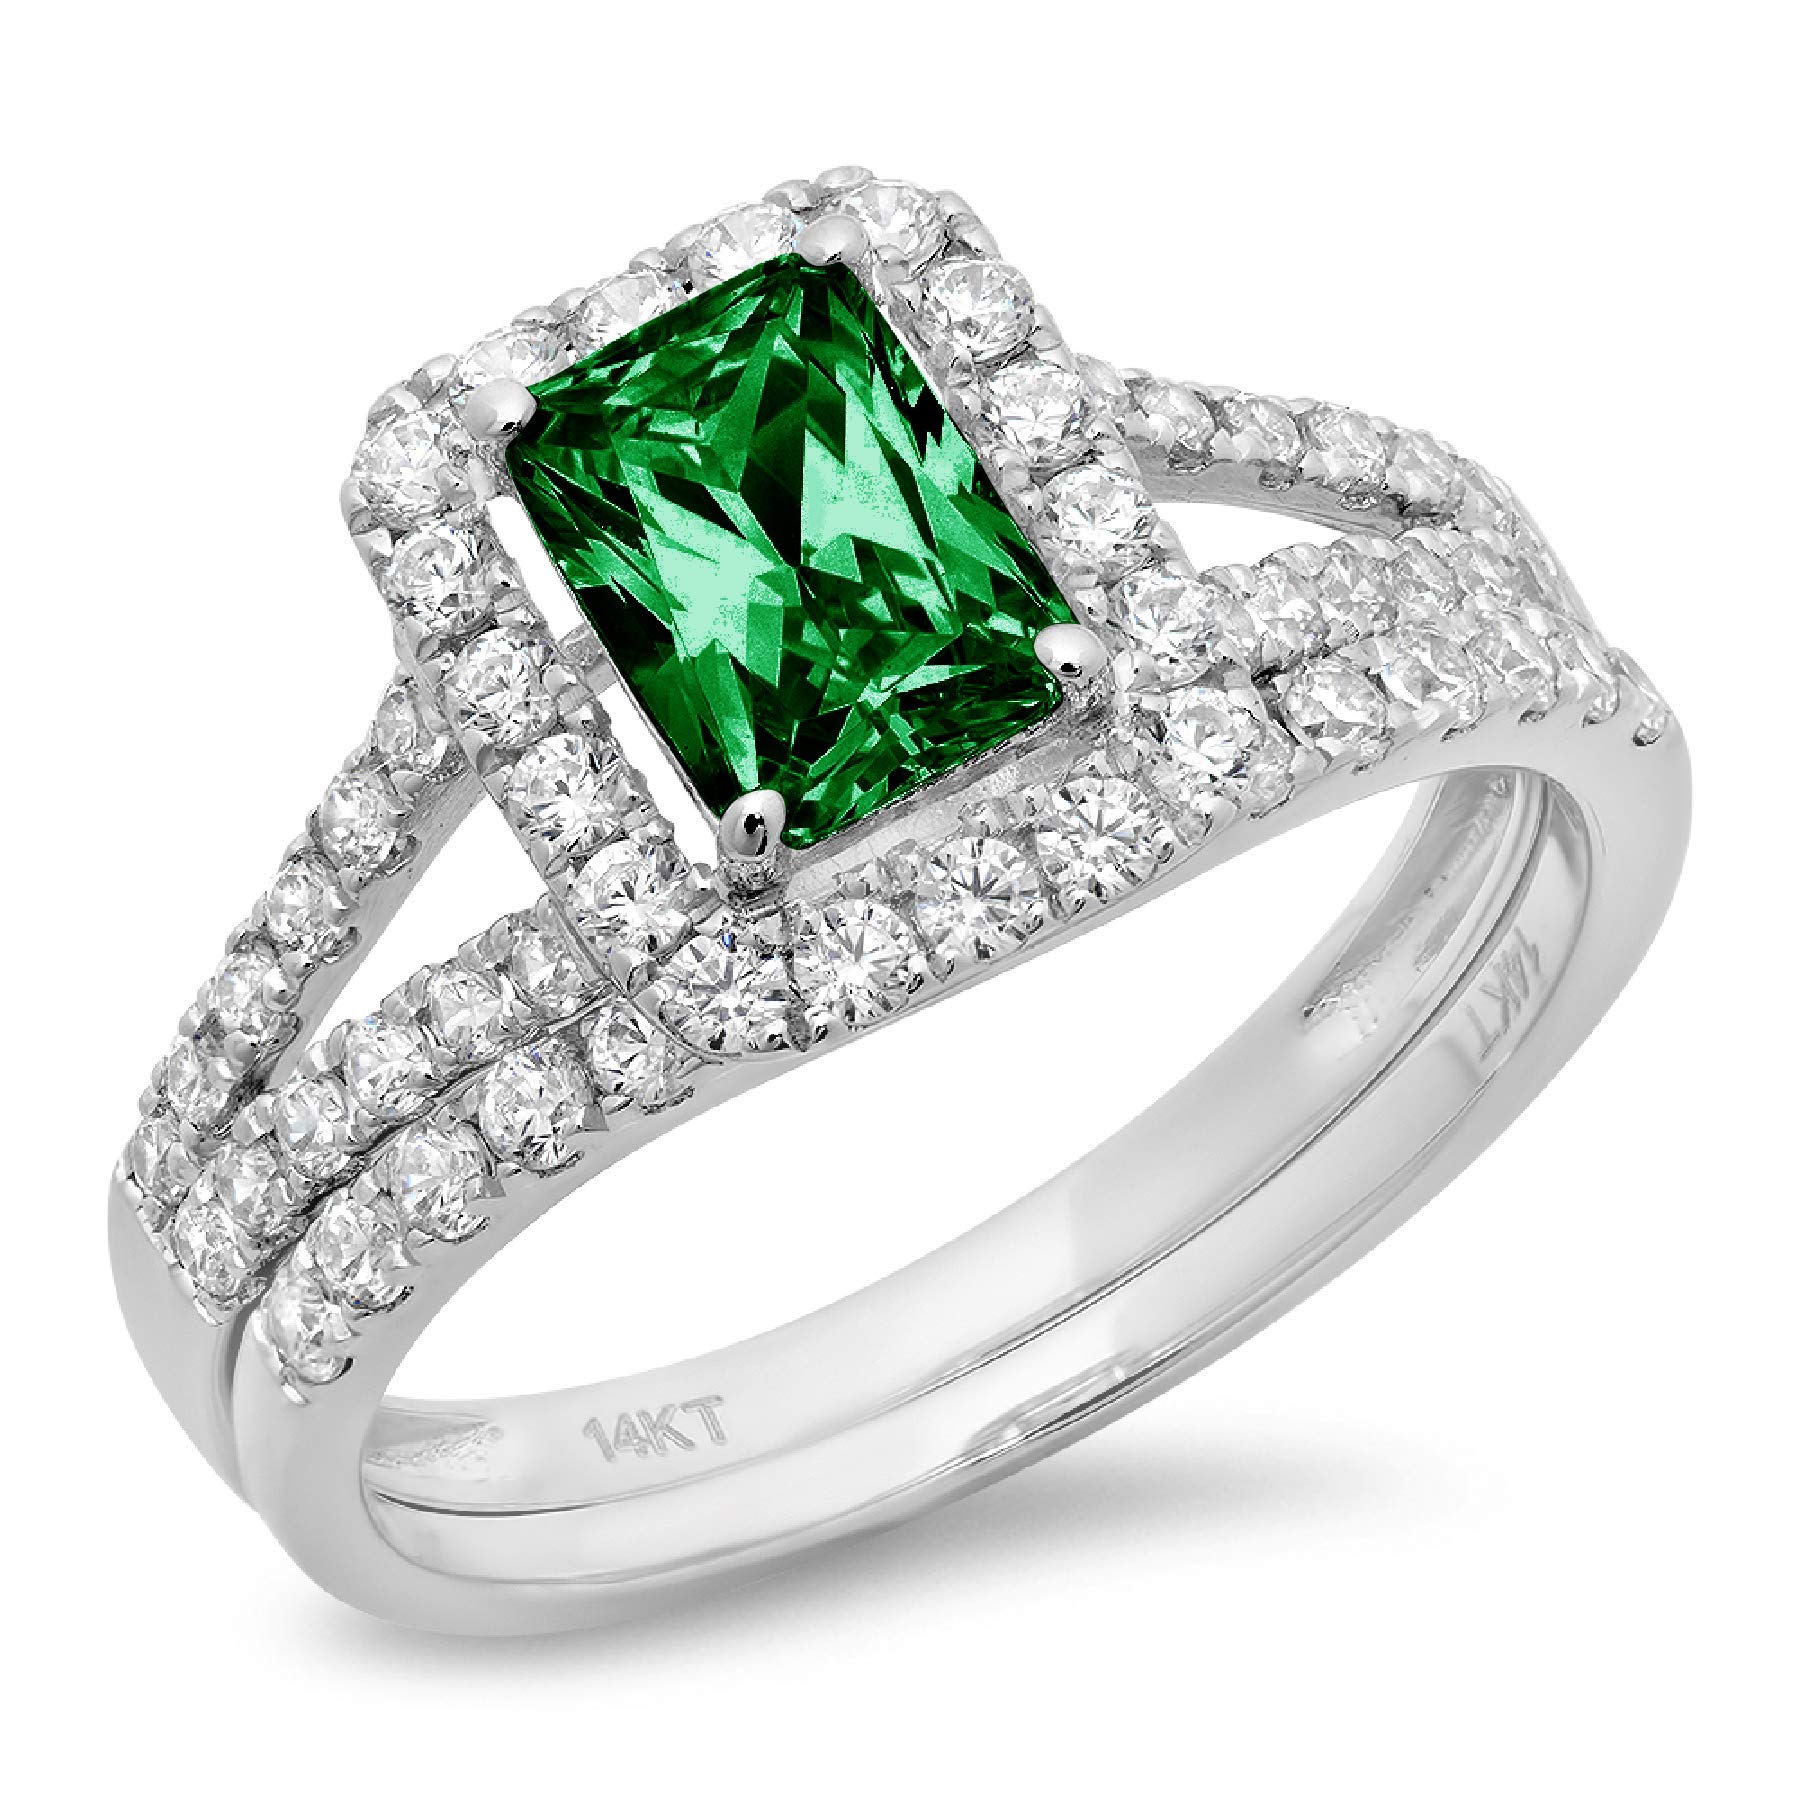 1.54ct Emerald Round Cut Pave Halo Split Shank Solitaire Accent VVS1 Ideal Flawless Simulated CZ Green Emerald Engagement Promise Designer Anniversary Wedding Bridal ring band set 14k White Gold